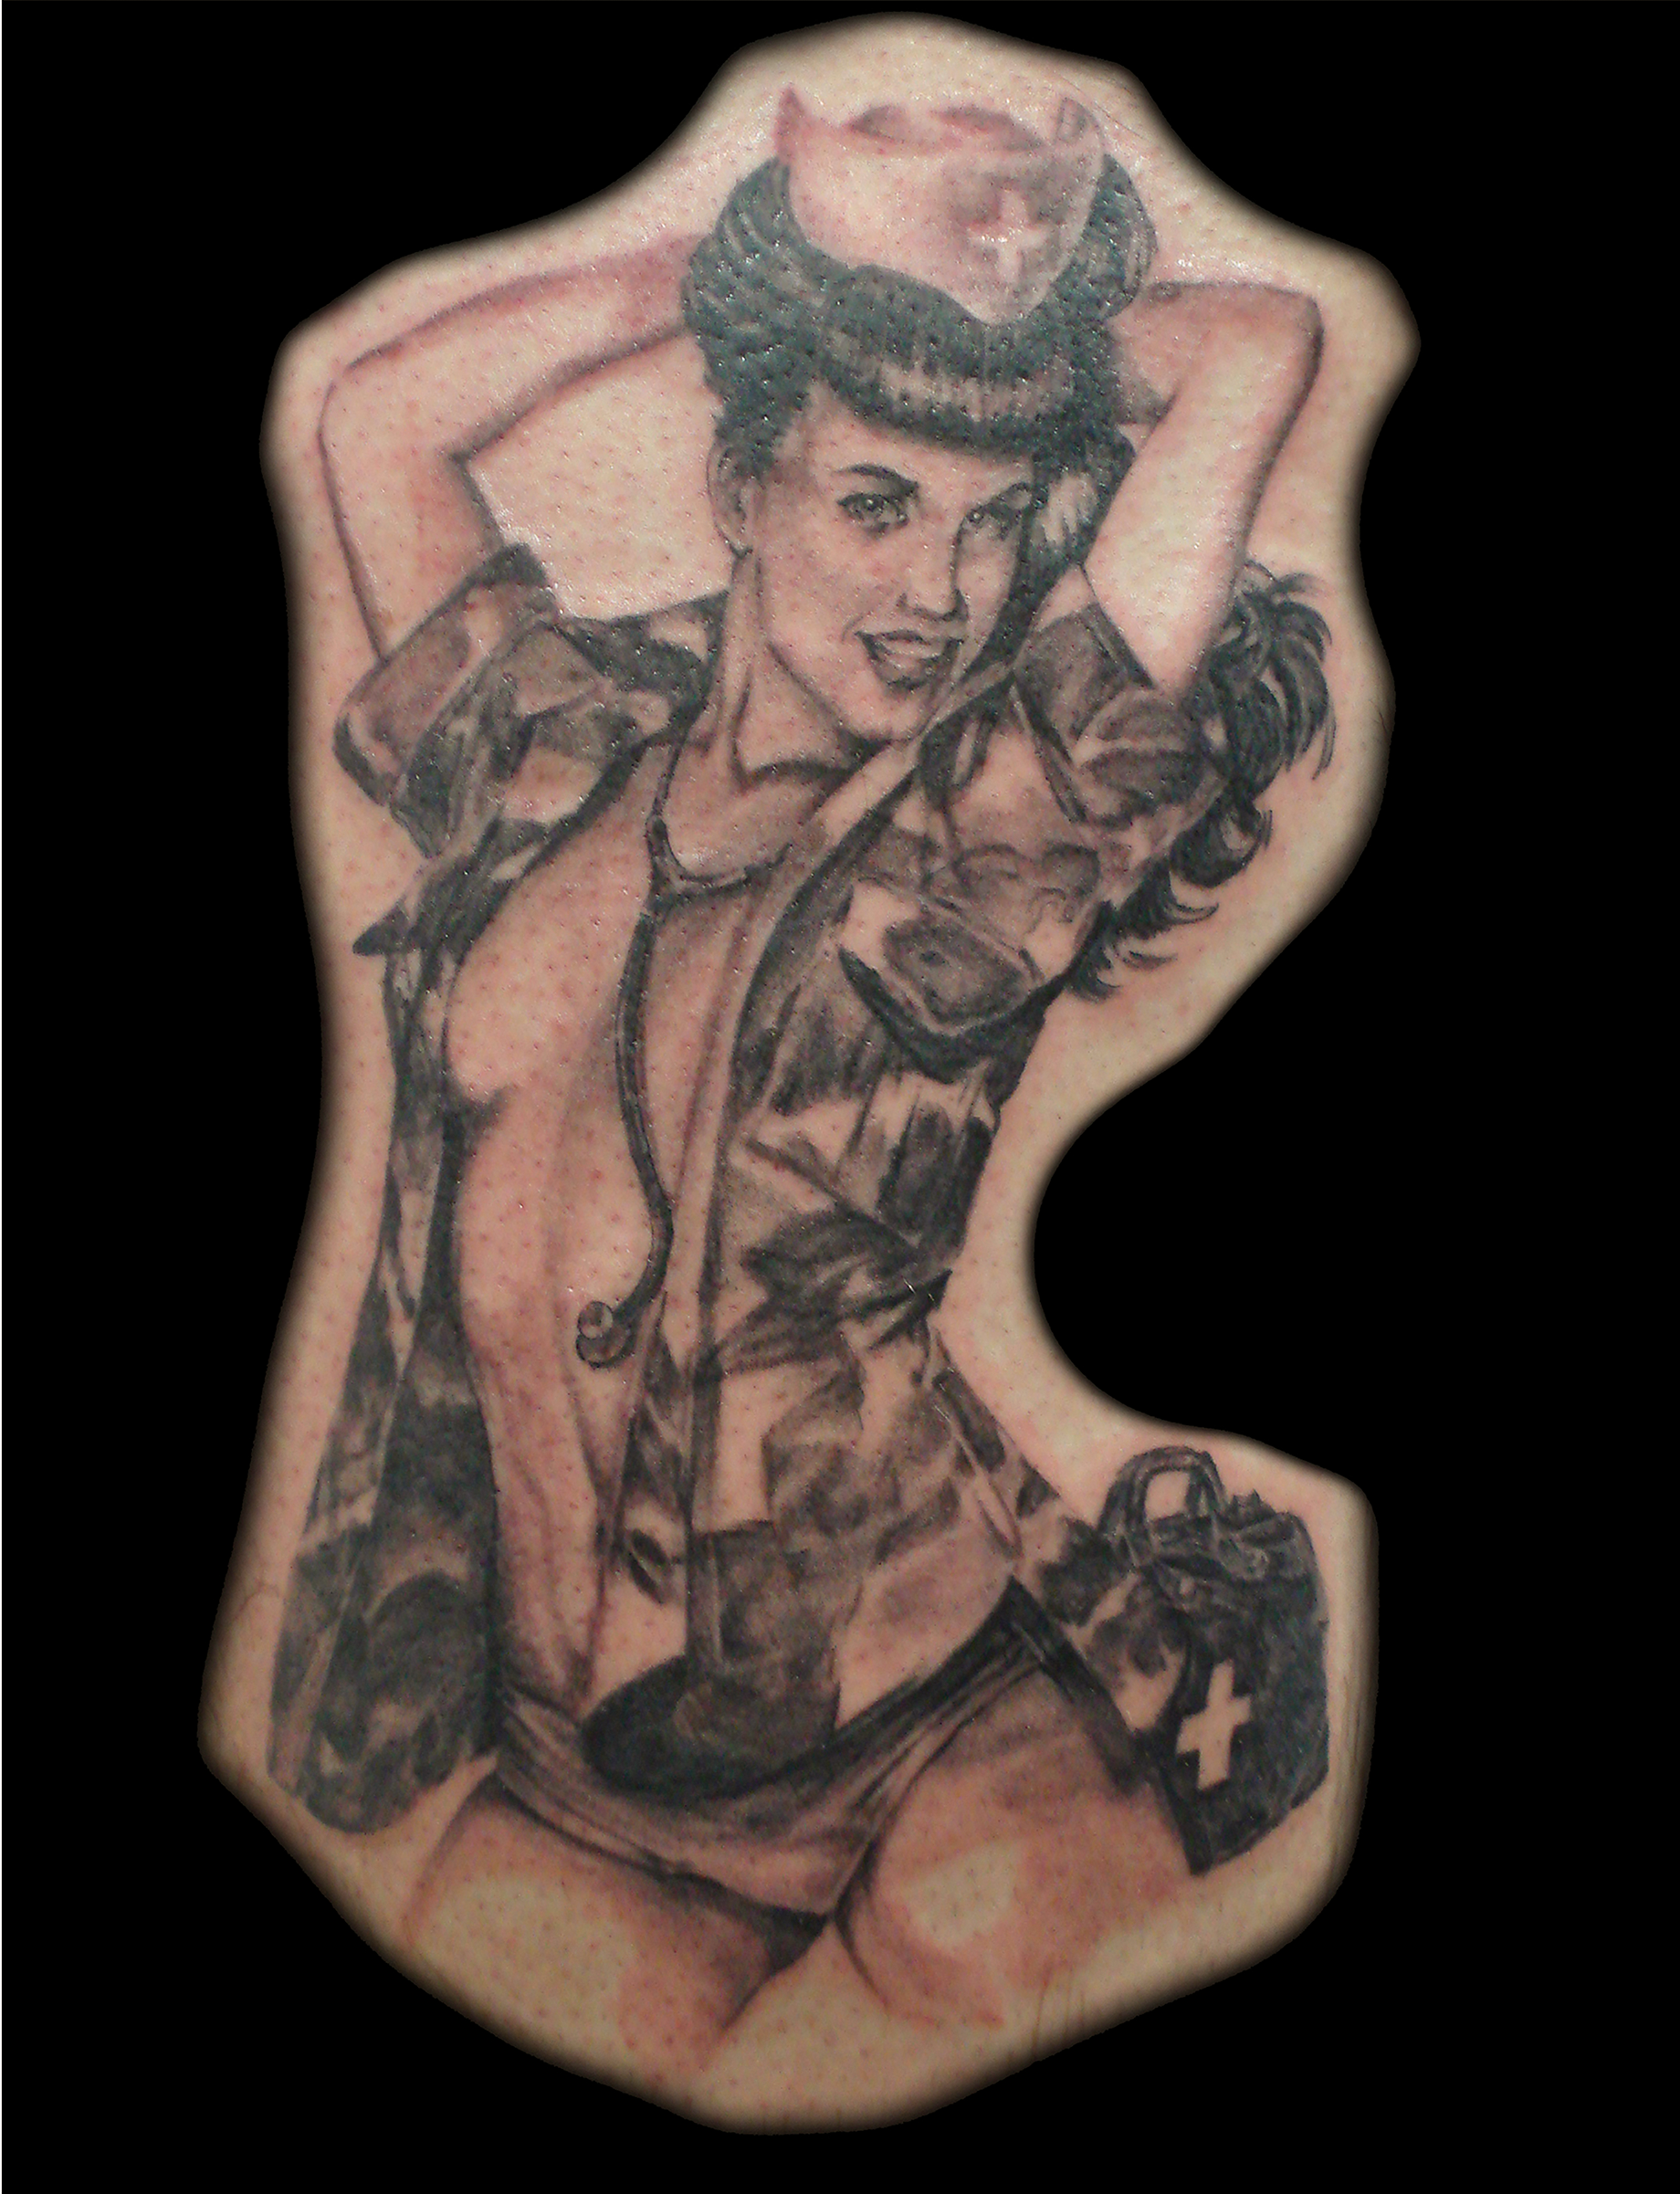 Bettie Paige pinup (pin up)  tattoo, done in realistic black and grey, She is a nurse with an open cammo blouse.